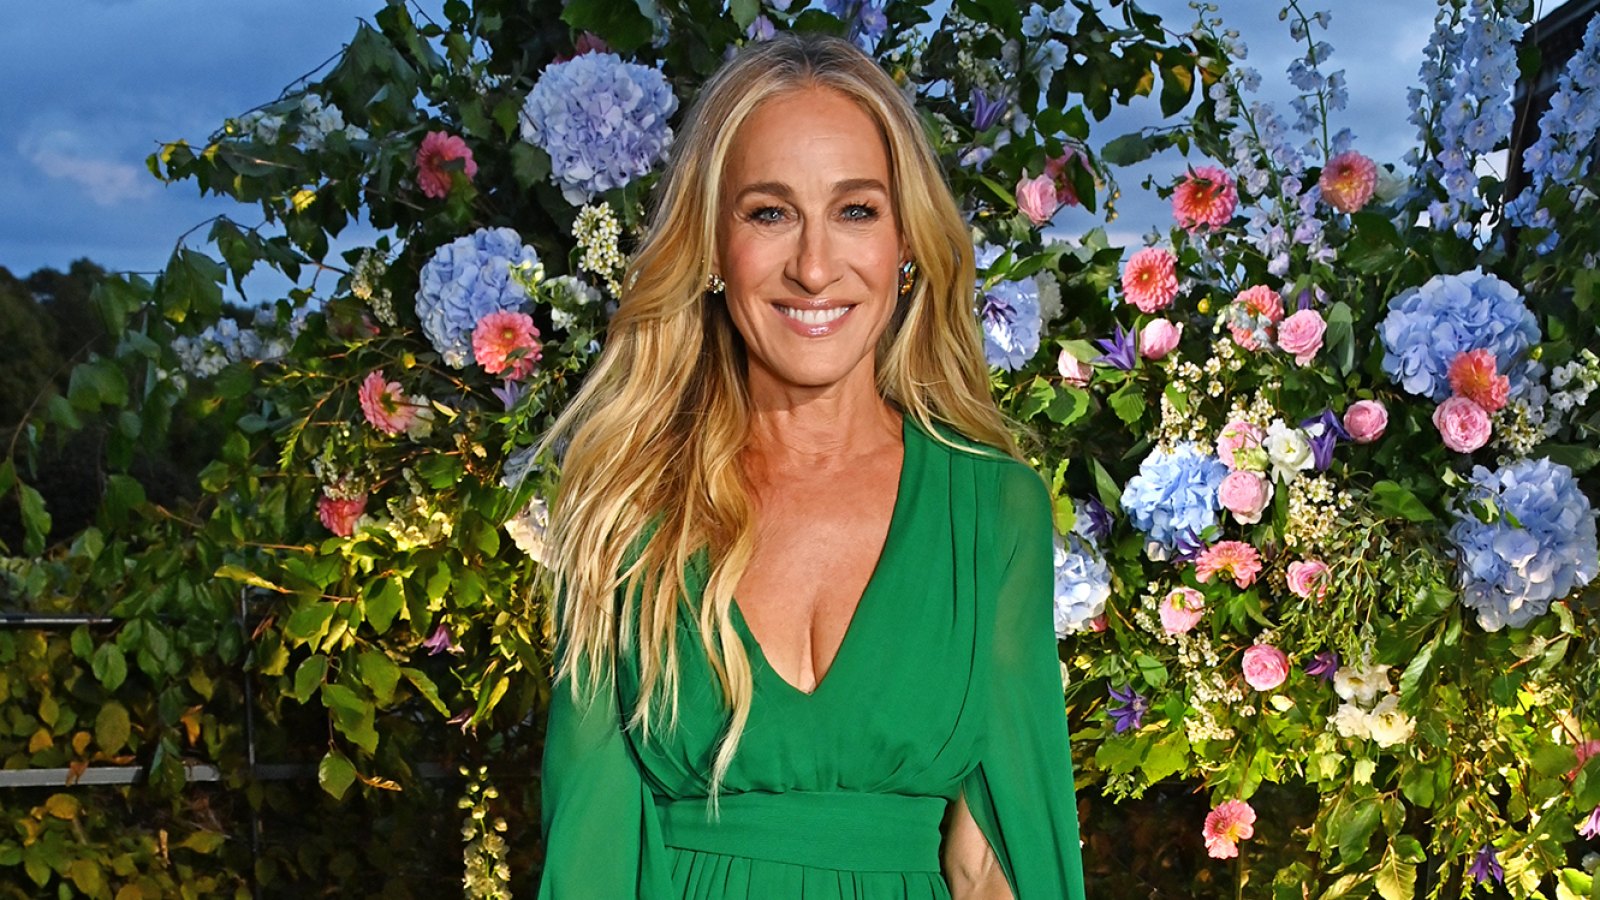 Sarah Jessica Parker attends the ATG Summer Party